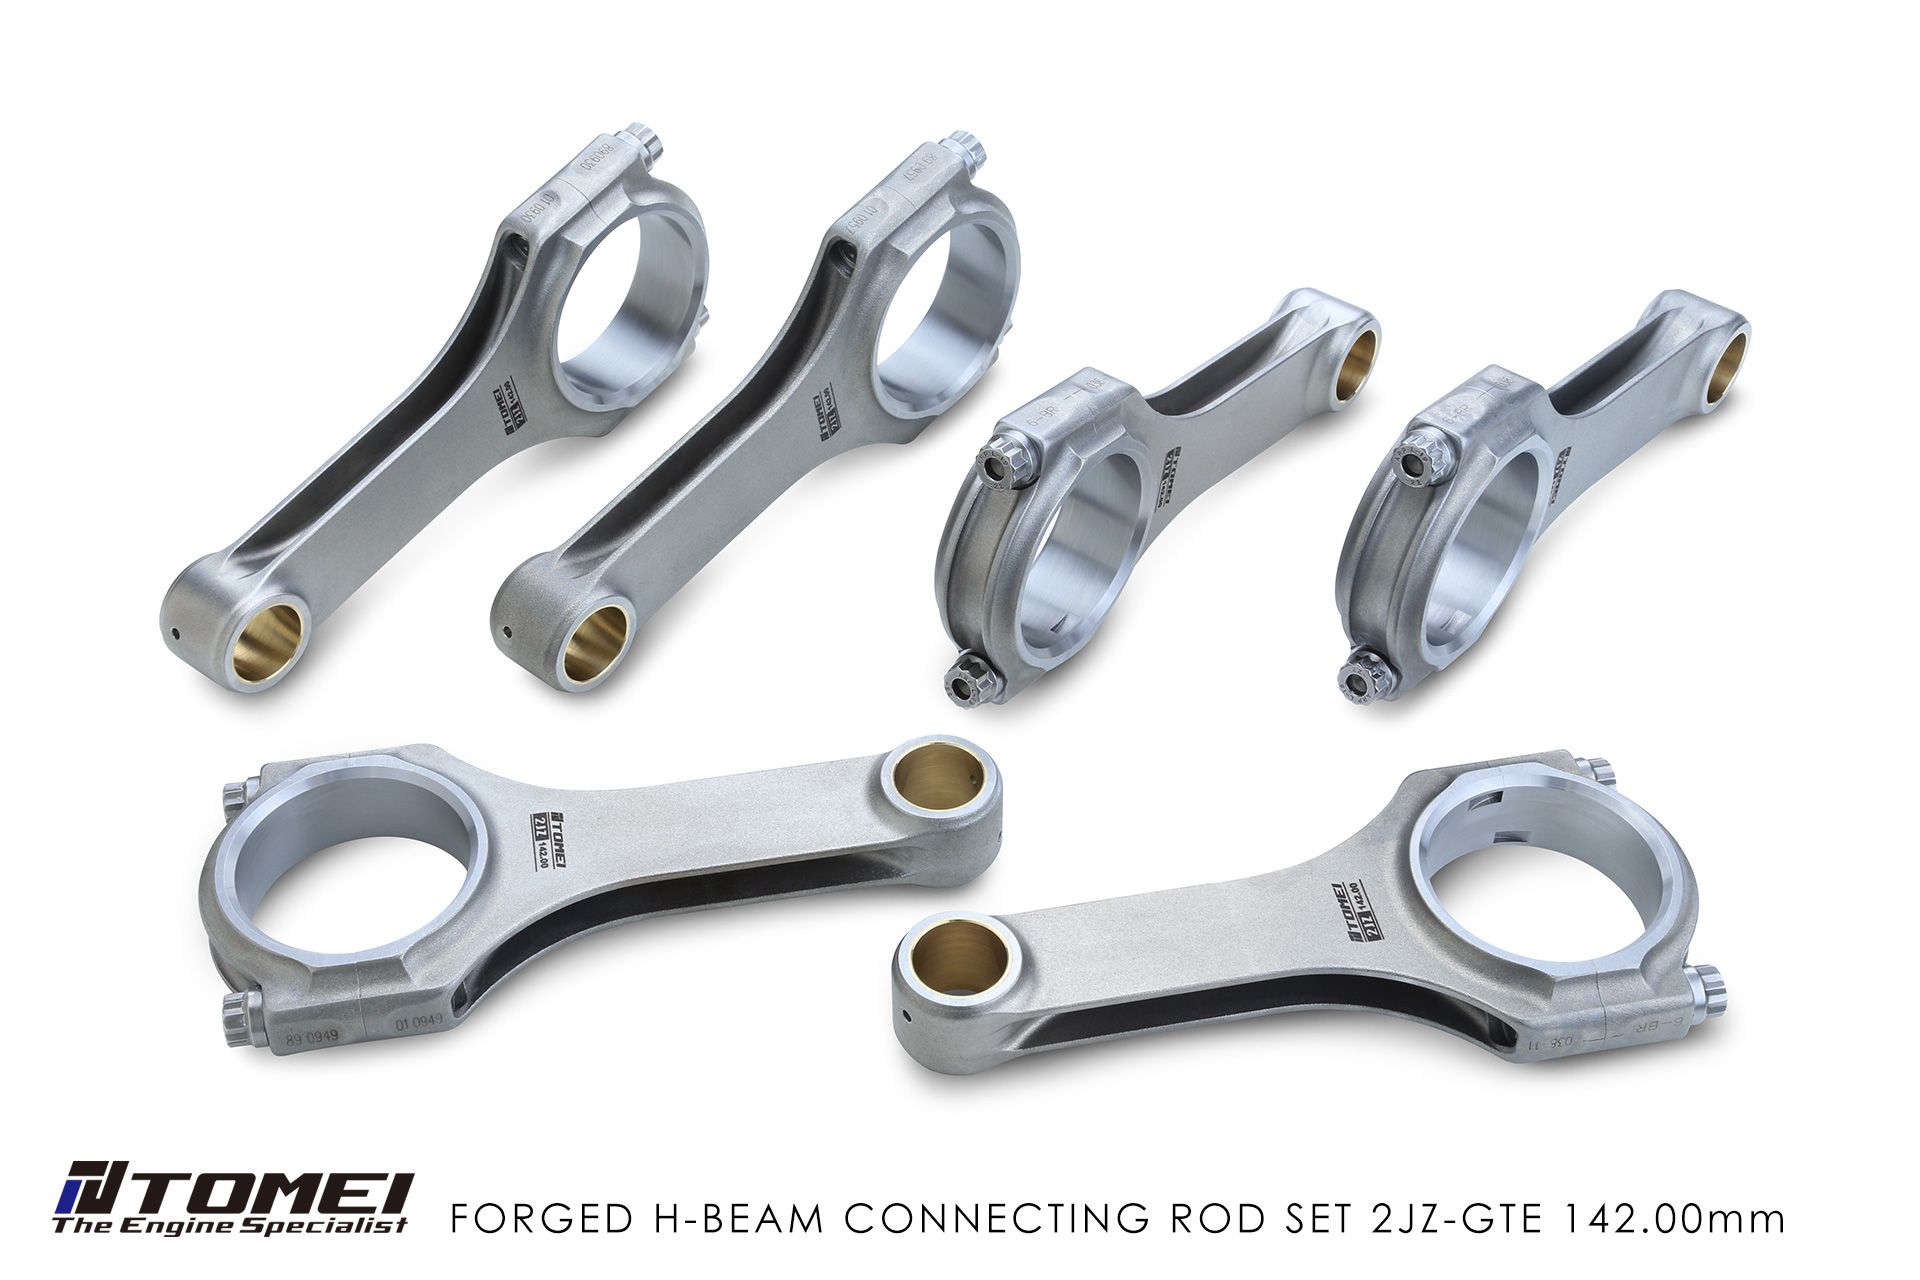 Tomei Forged H-Beam Connecting Rod Set 142mm 2JZ-GTE